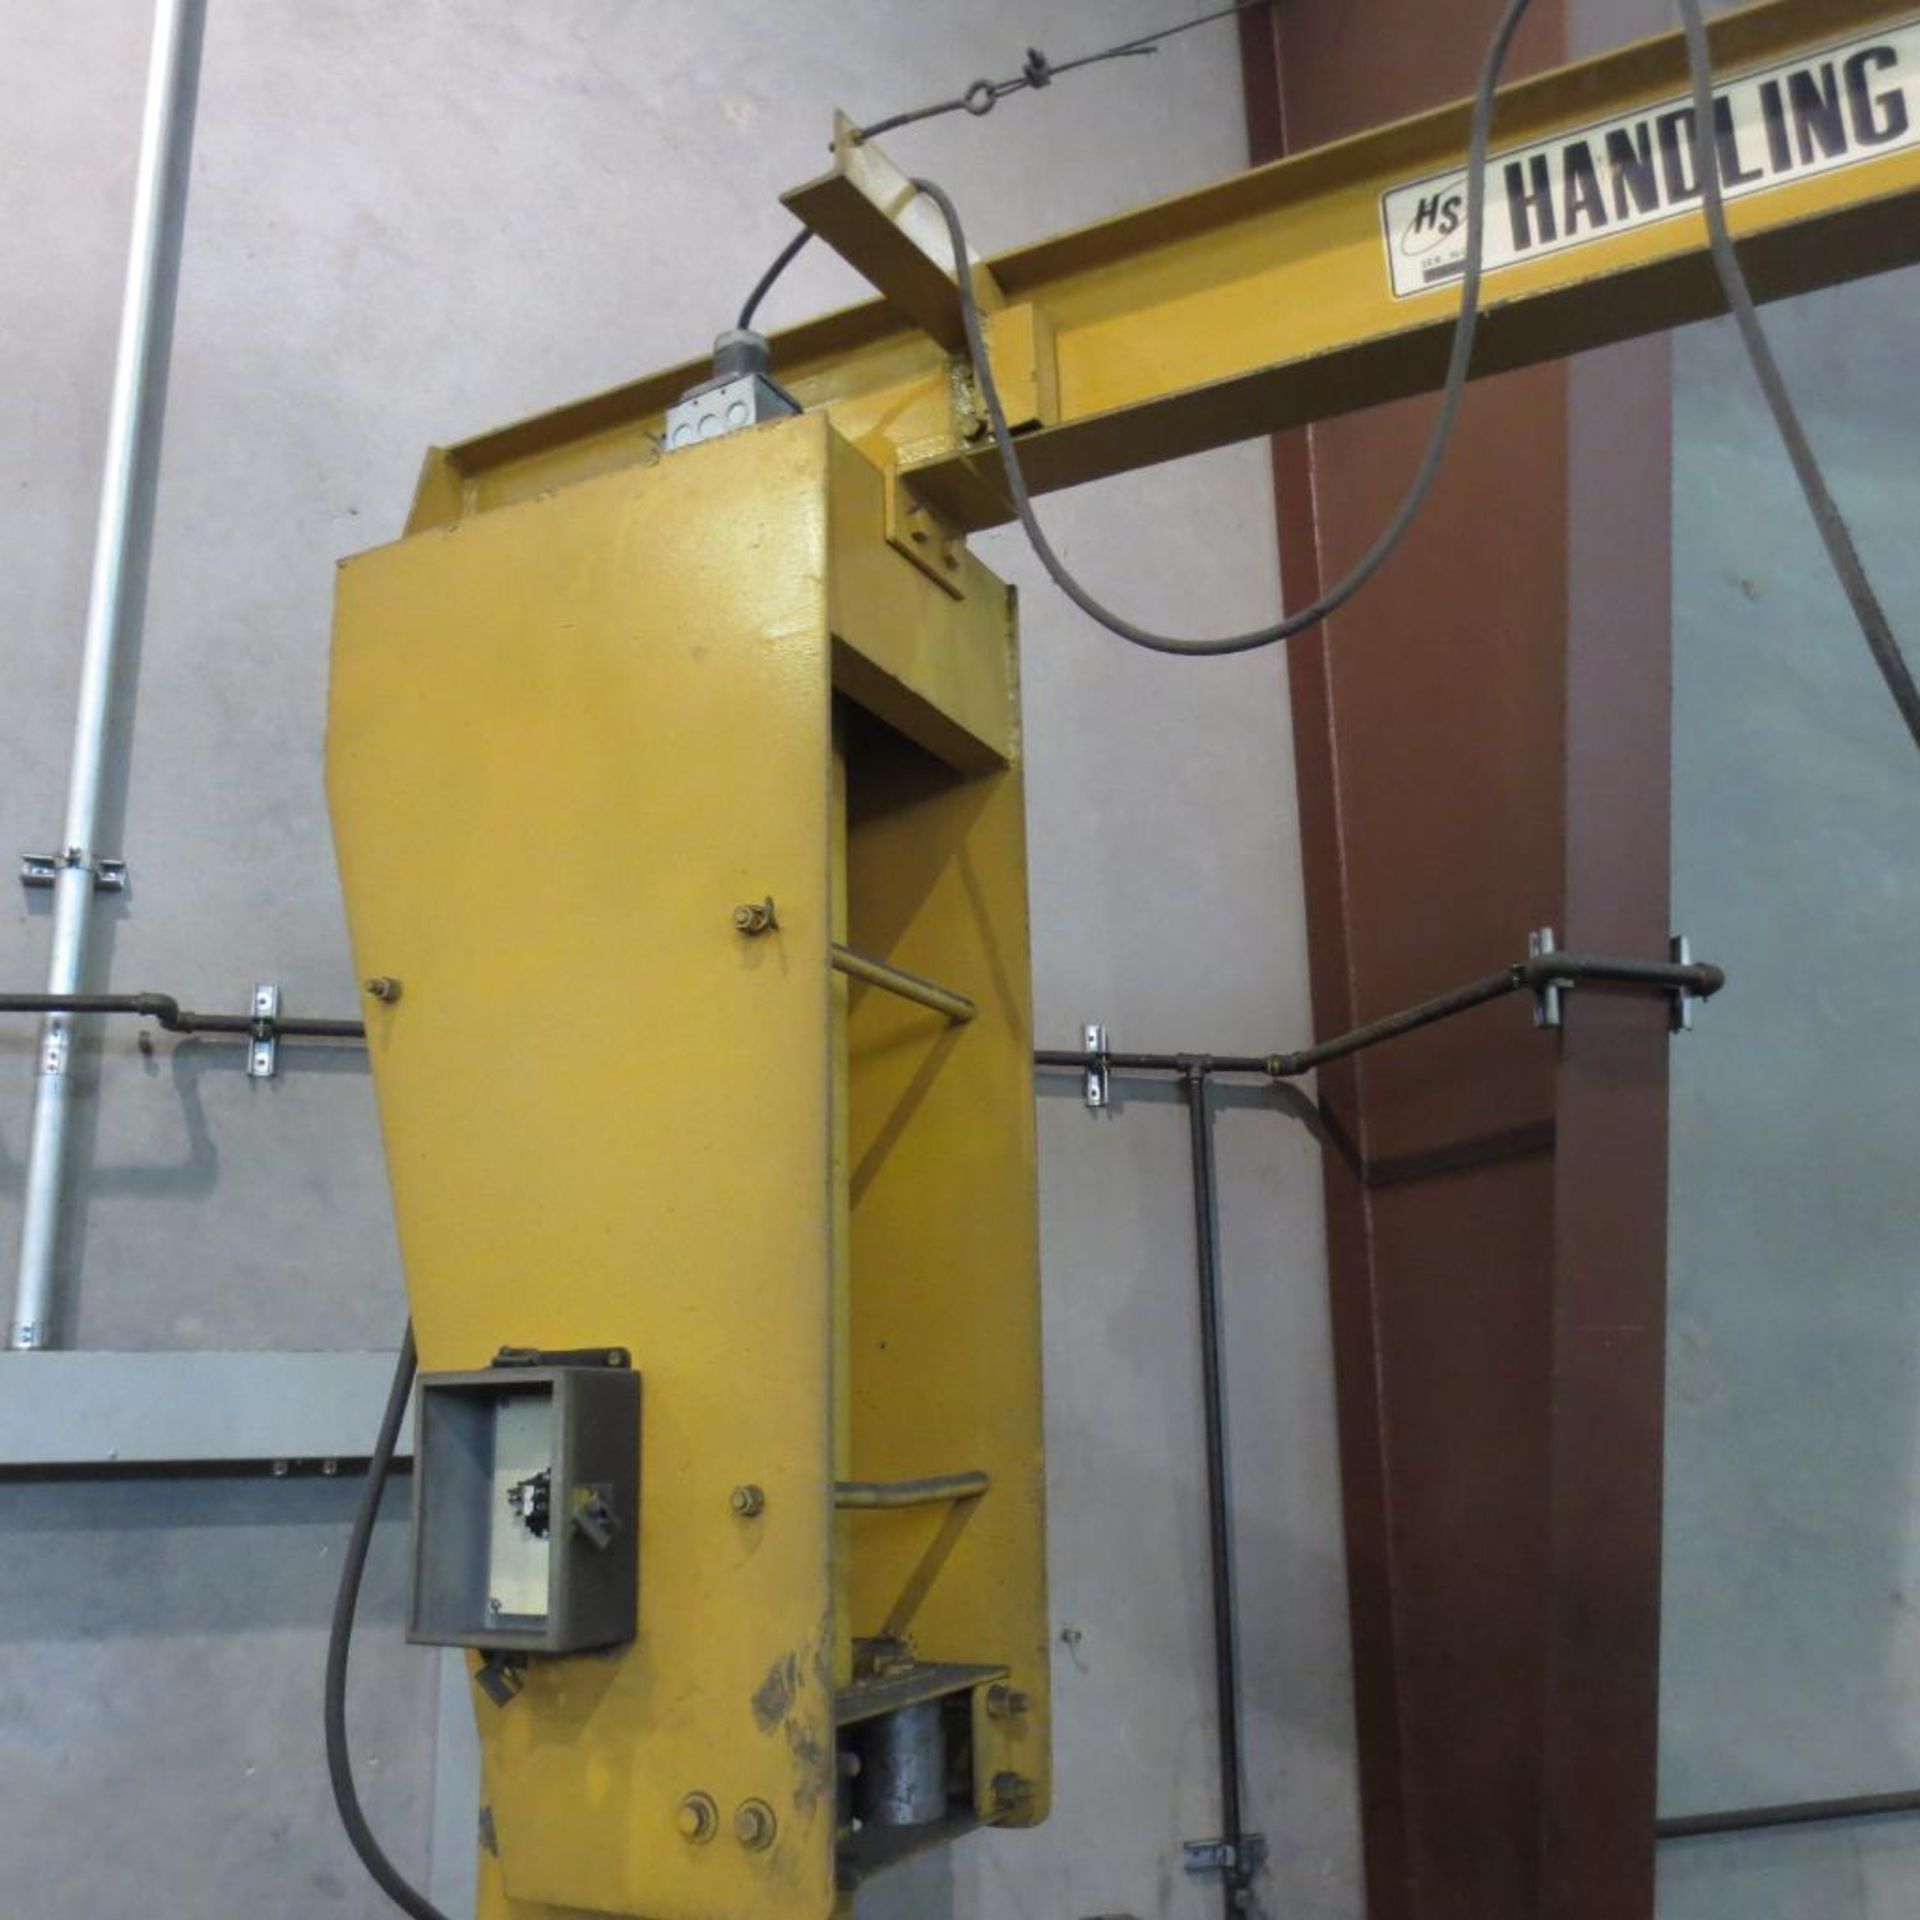 Floor Mounted Jib Est. 9' Tall X 13' Long with Ingersoll Rand 1/2 Ton Electric Hoist - Image 3 of 4